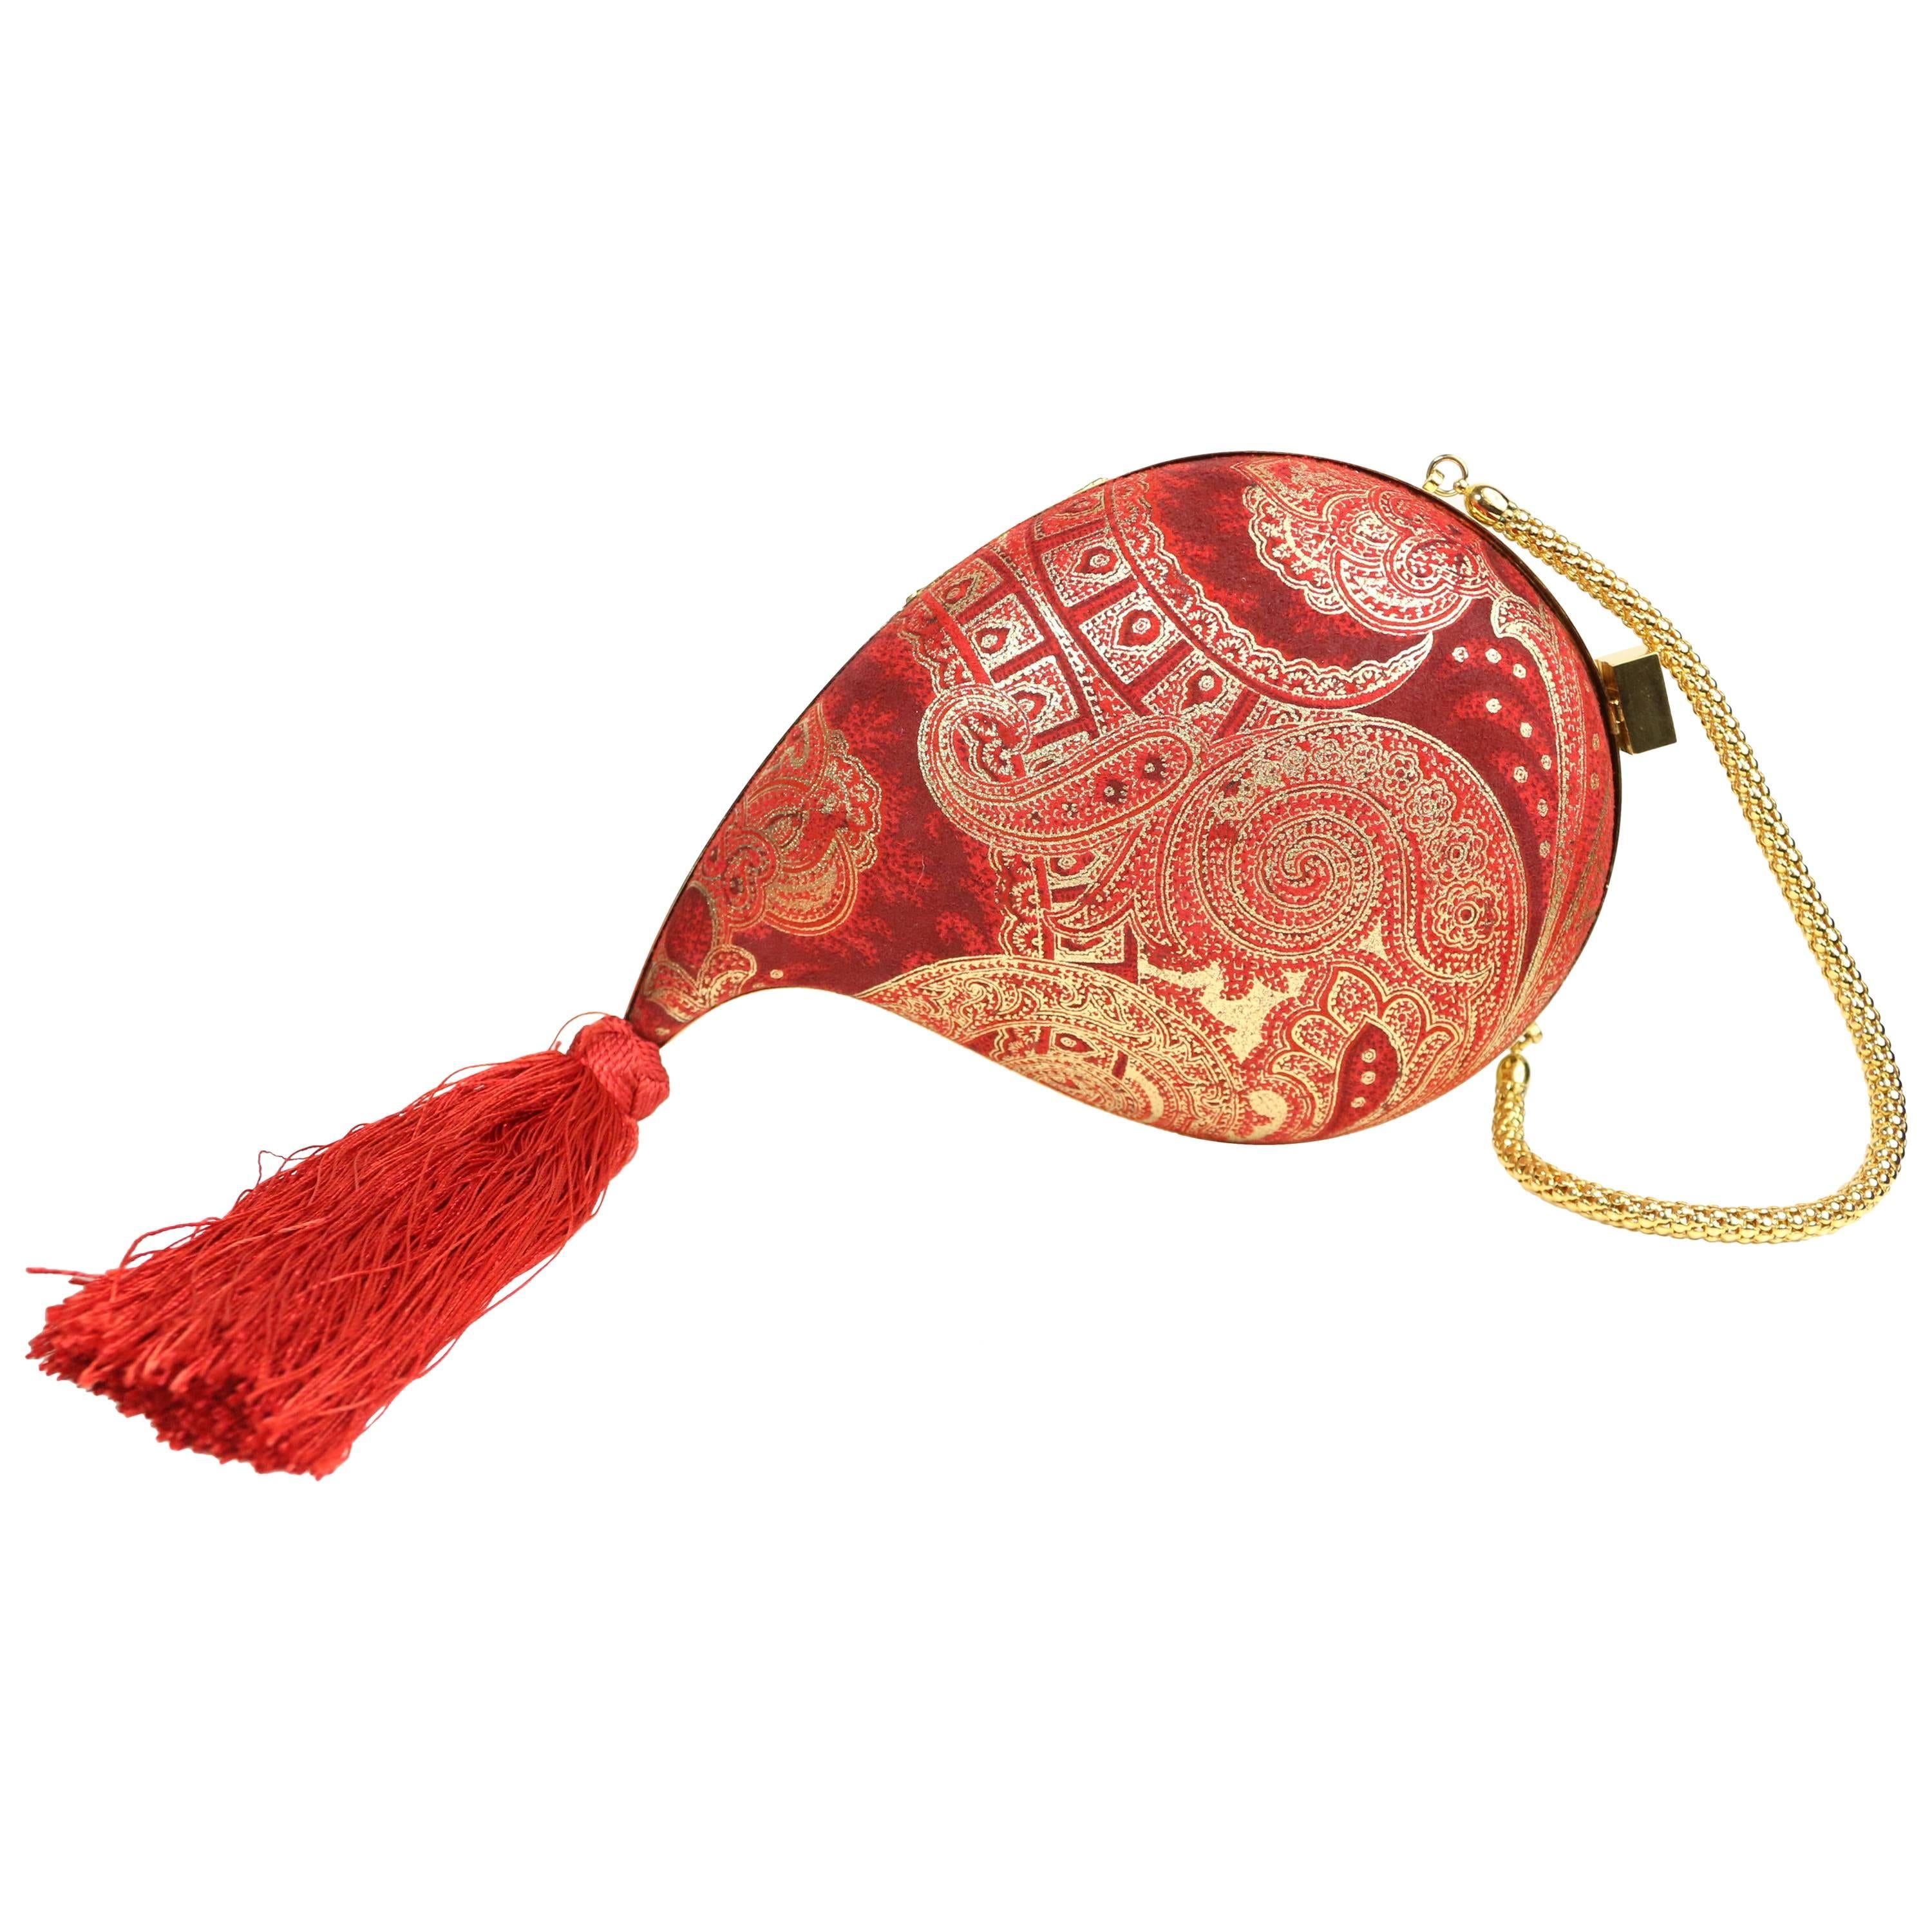 Philip Treacy Red and Gold Pattern Print with Tassel Clutches Handbag 